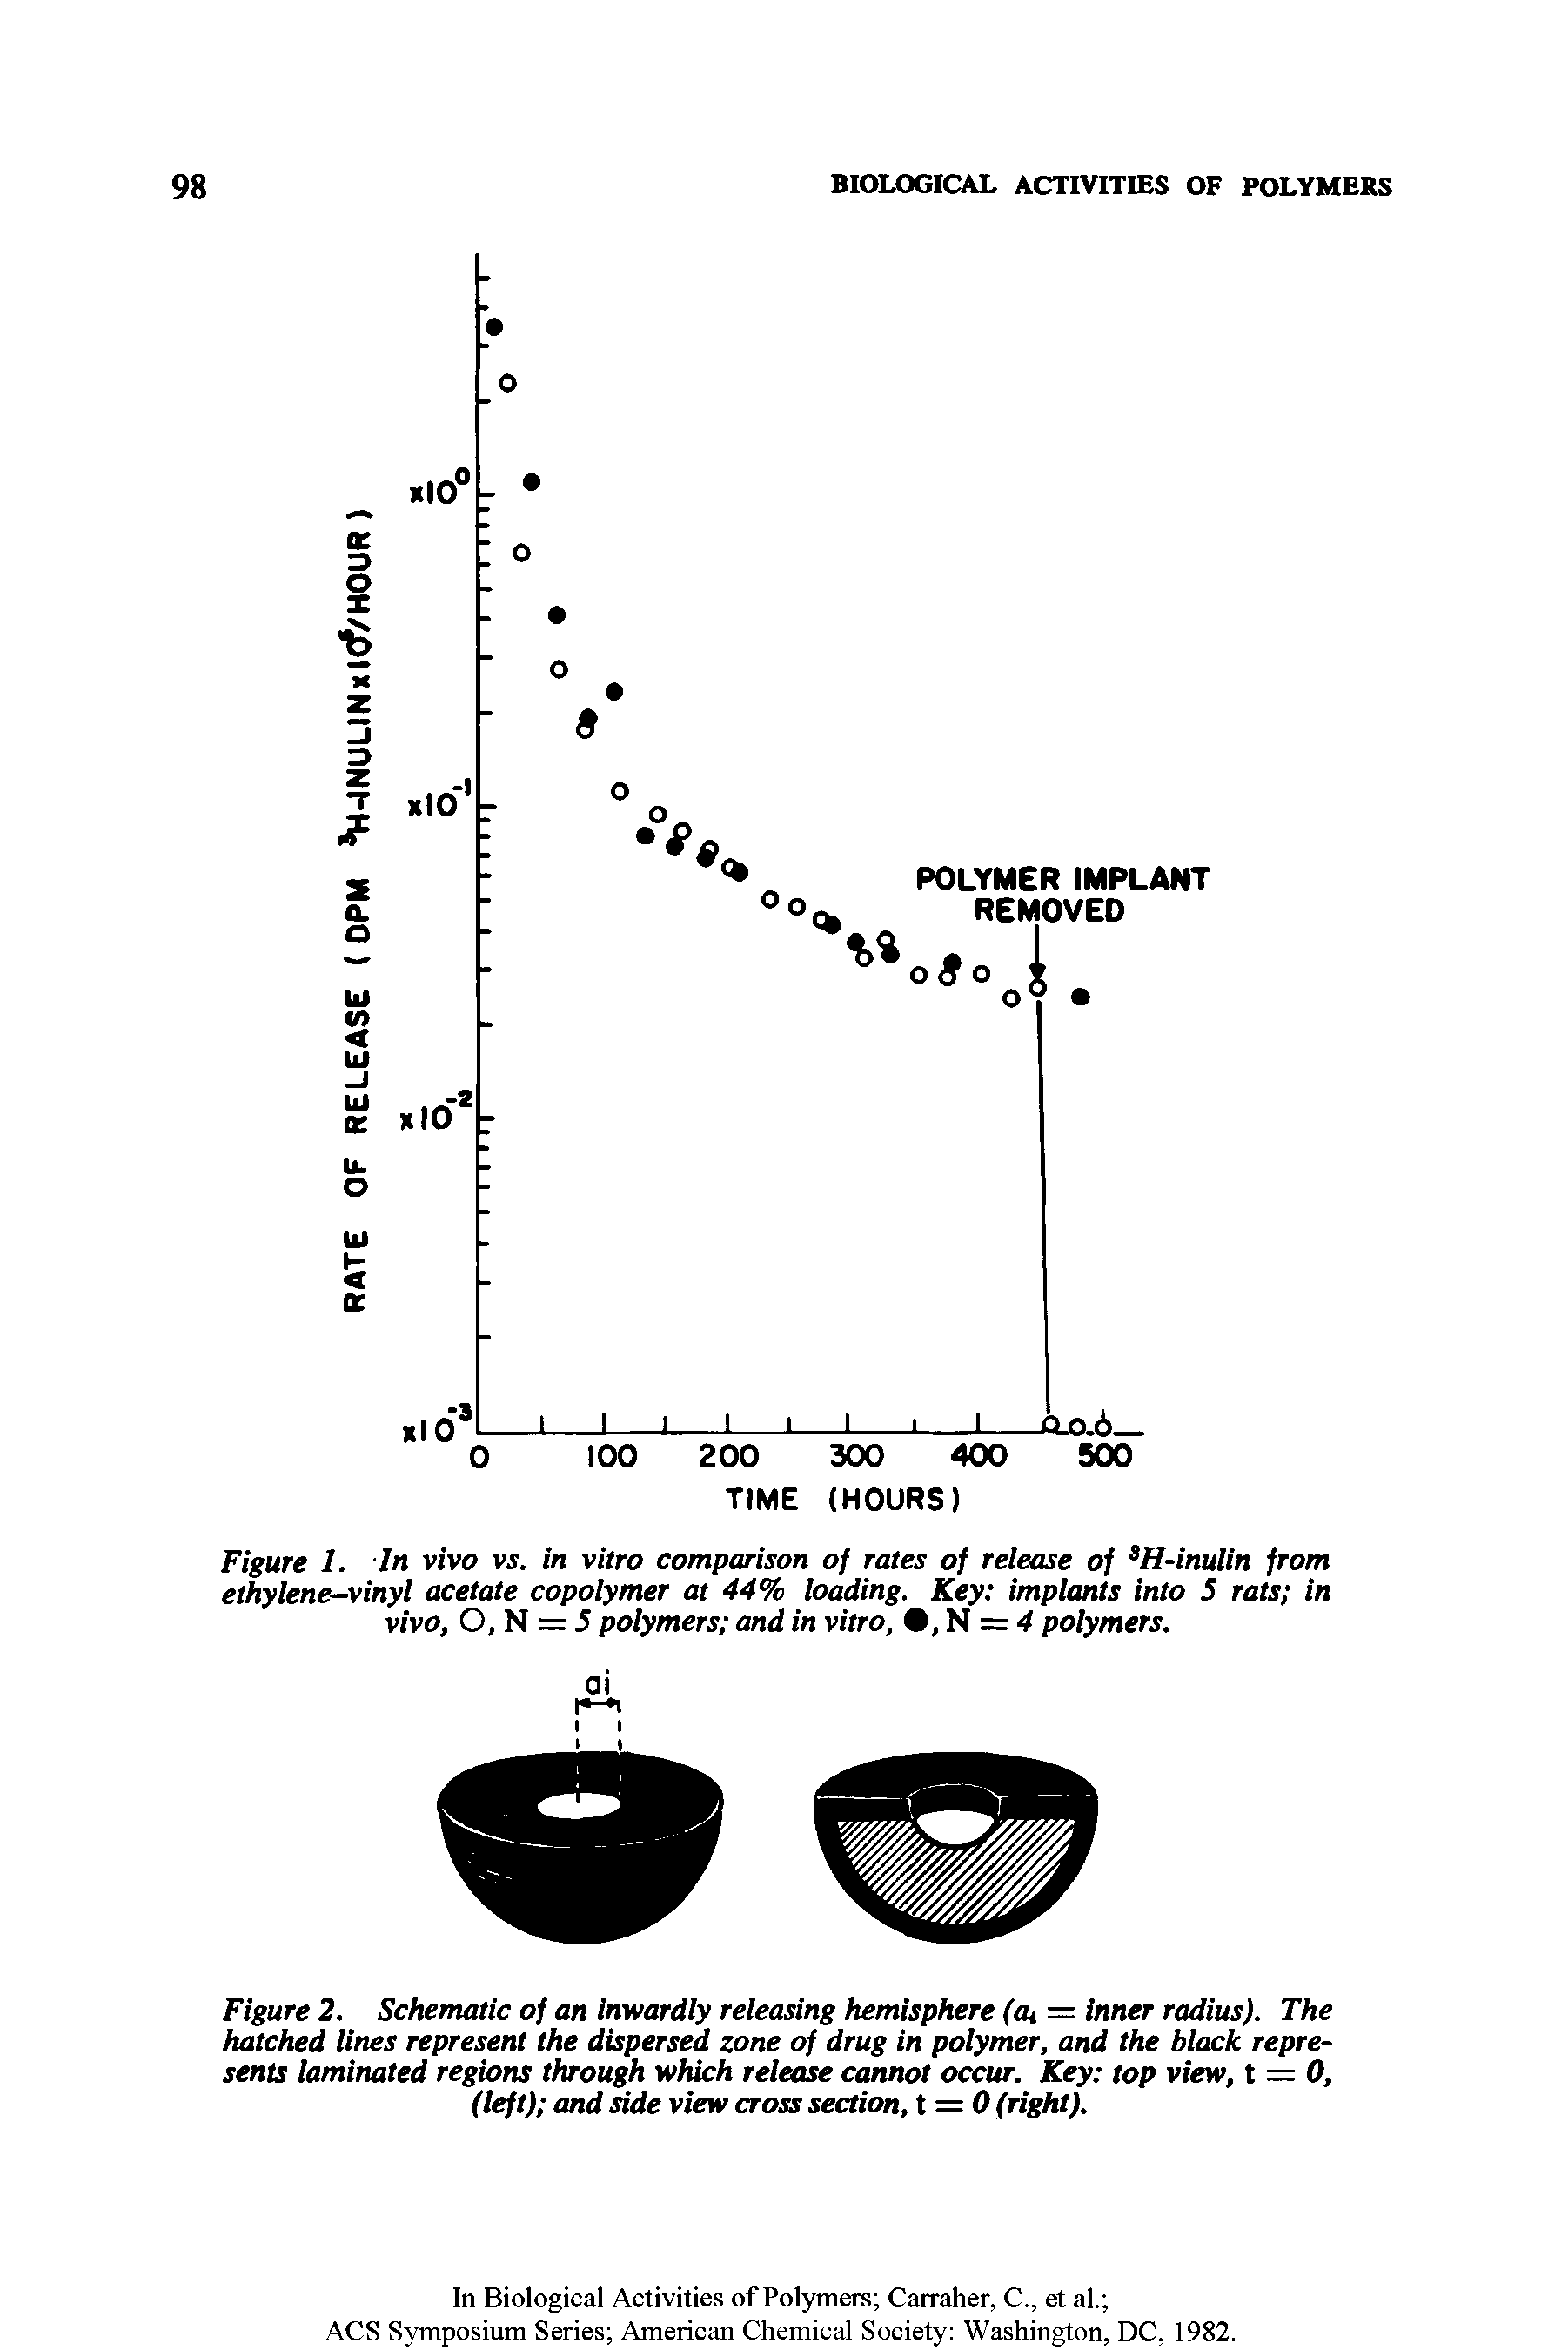 Figure 2. Schematic of an inwardly releasing hemisphere (ot = inner radius). The hatched lines represent the dispersed zone of drug in polymer, and the black represents laminated regions through which release cannot occur. Key top view, t — 0, (left) and side view cross section, t = 0 (right).